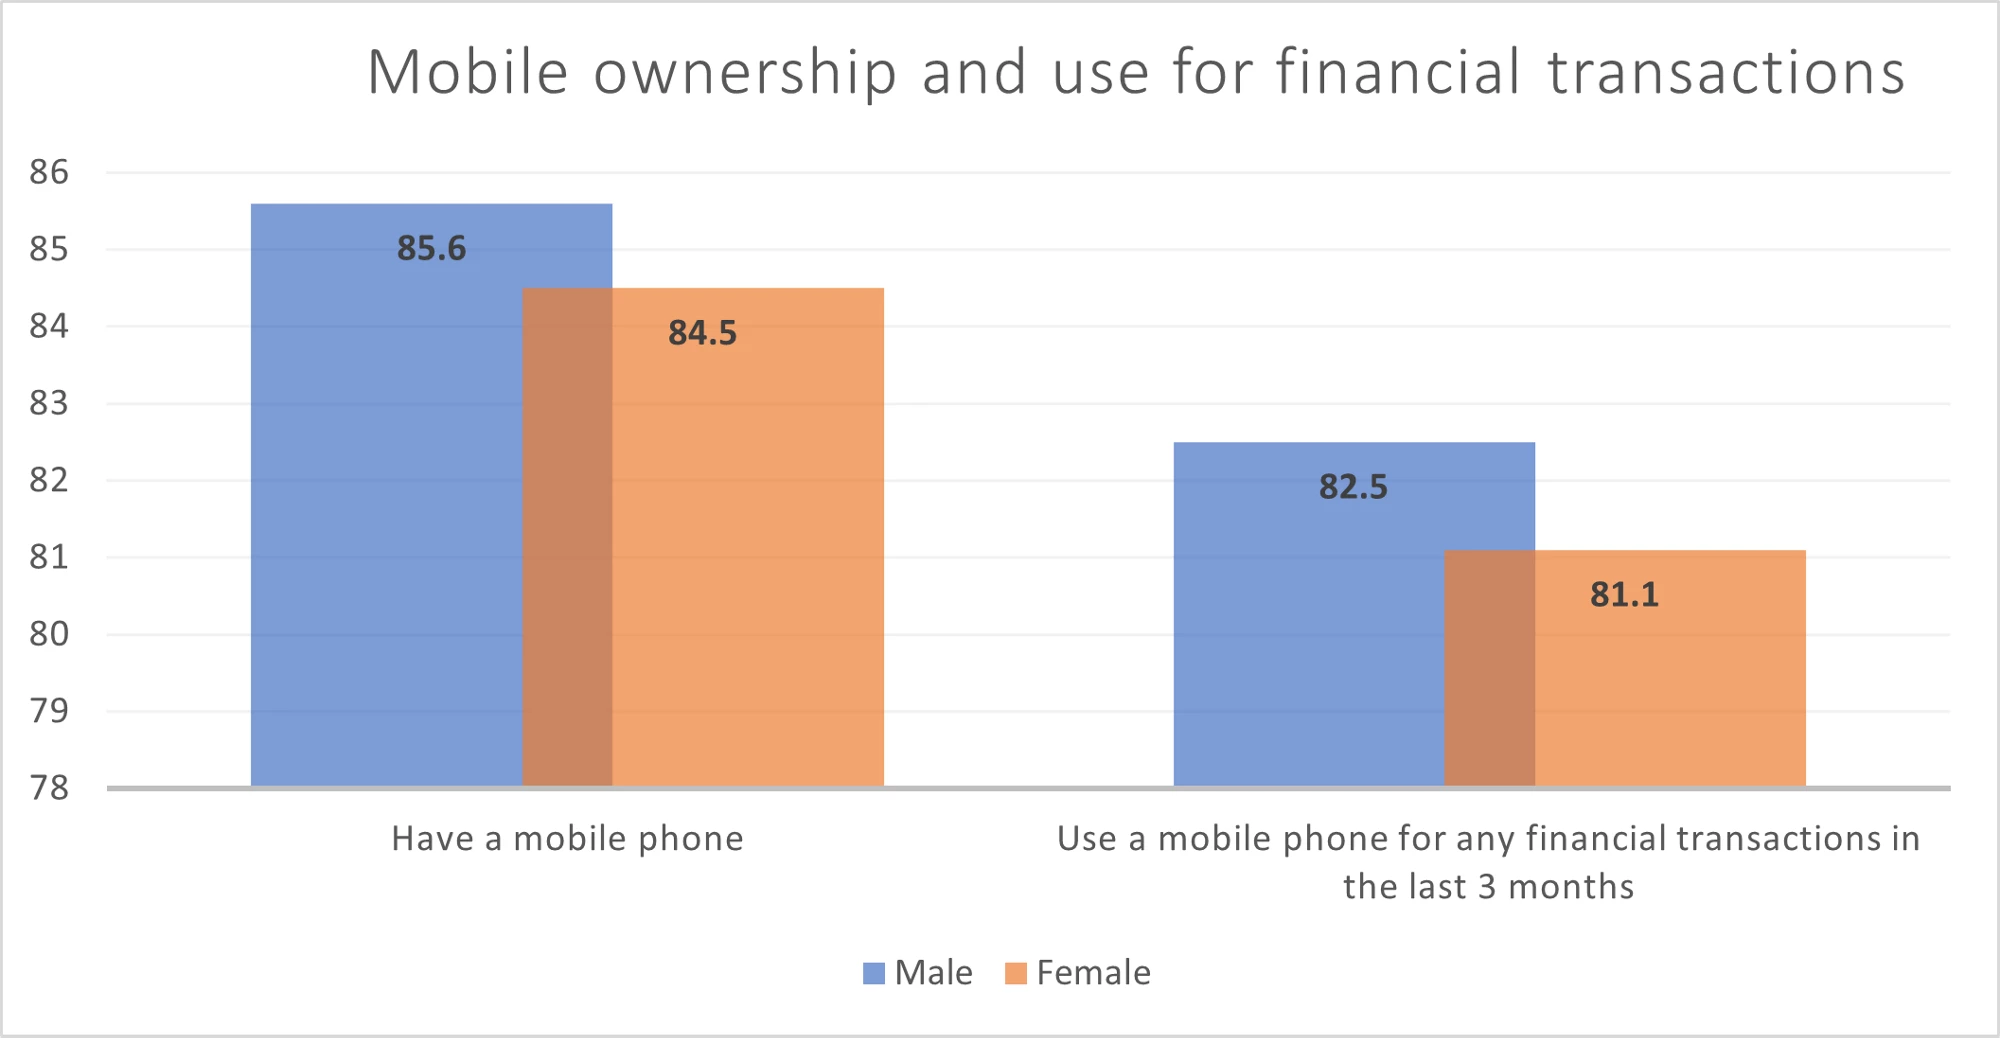 Mobile ownership and use for financial transactions